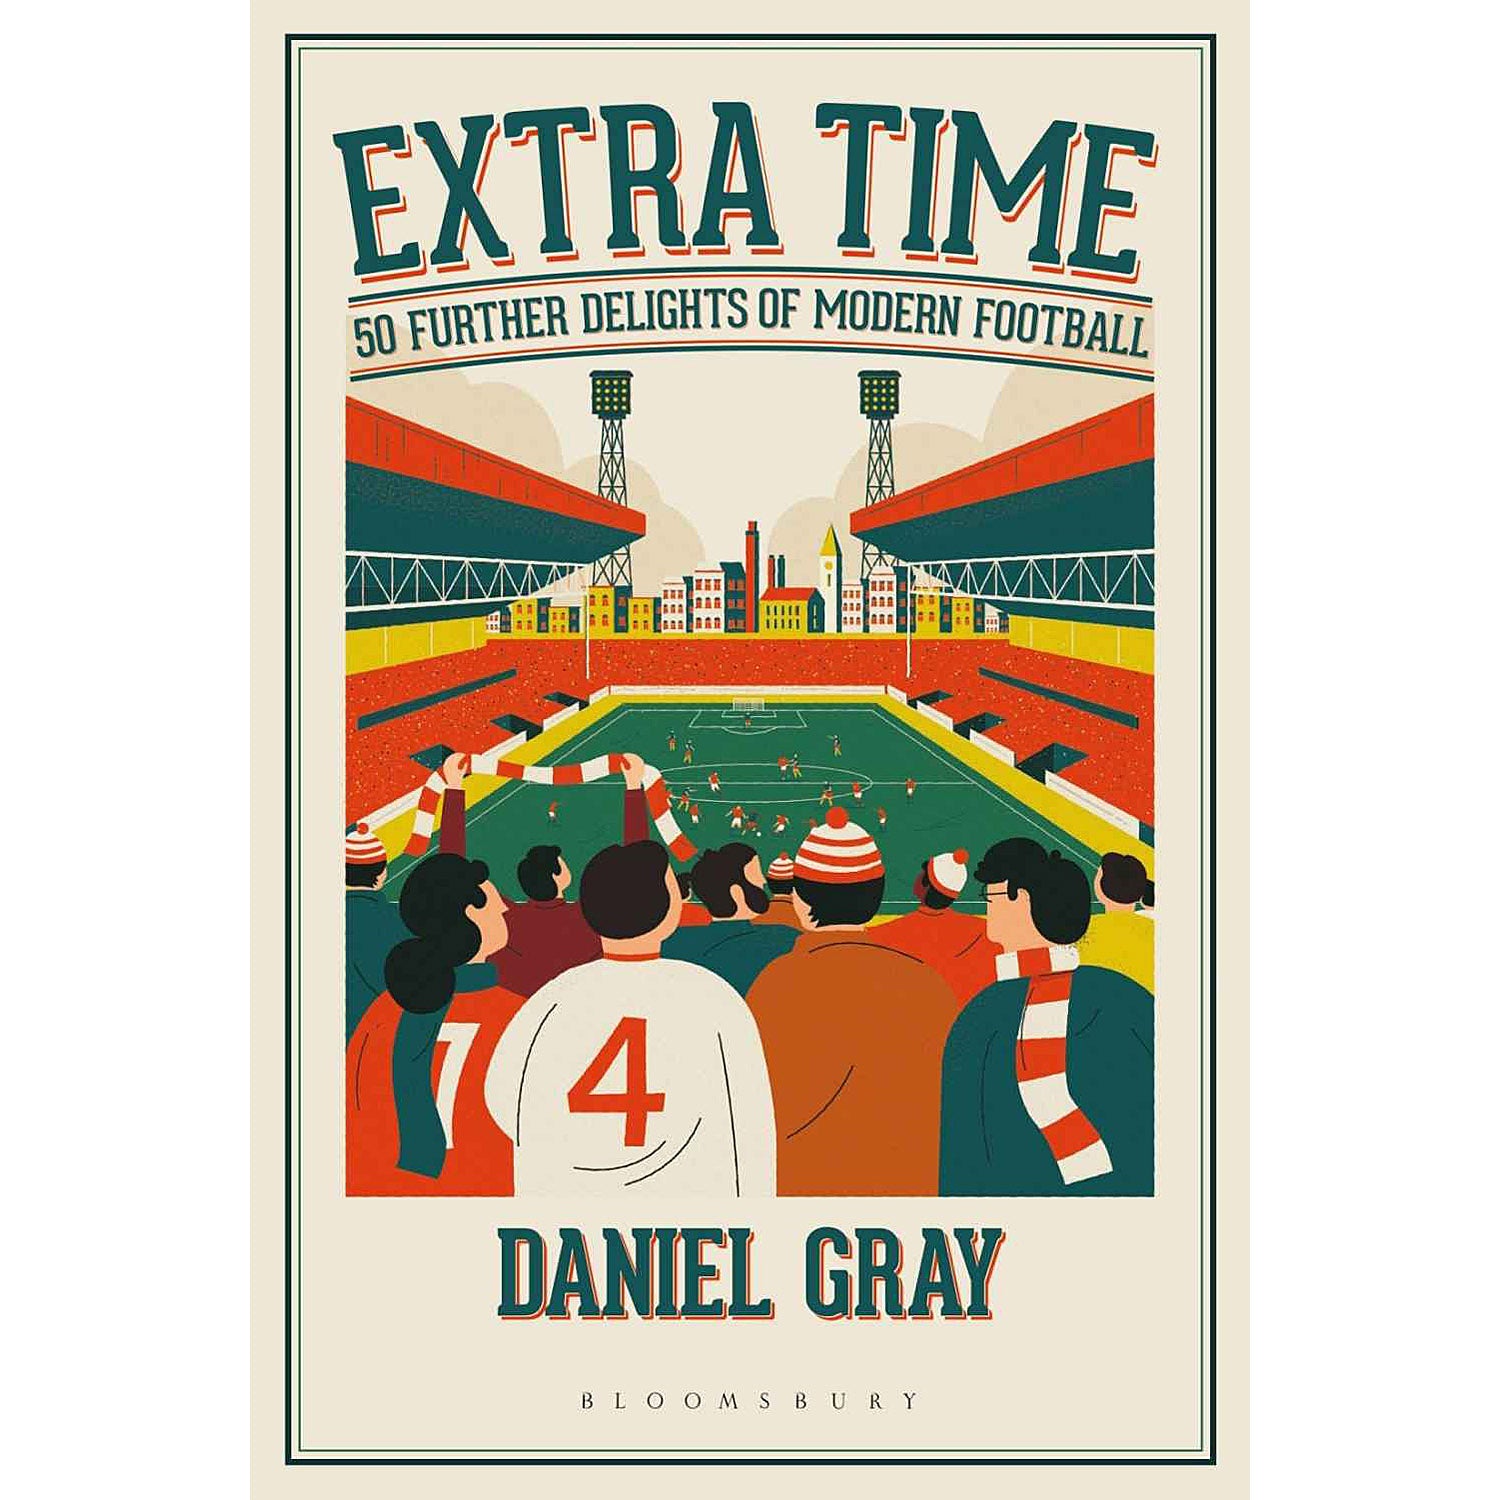 Extra Time – 50 Further Delights of Modern Football